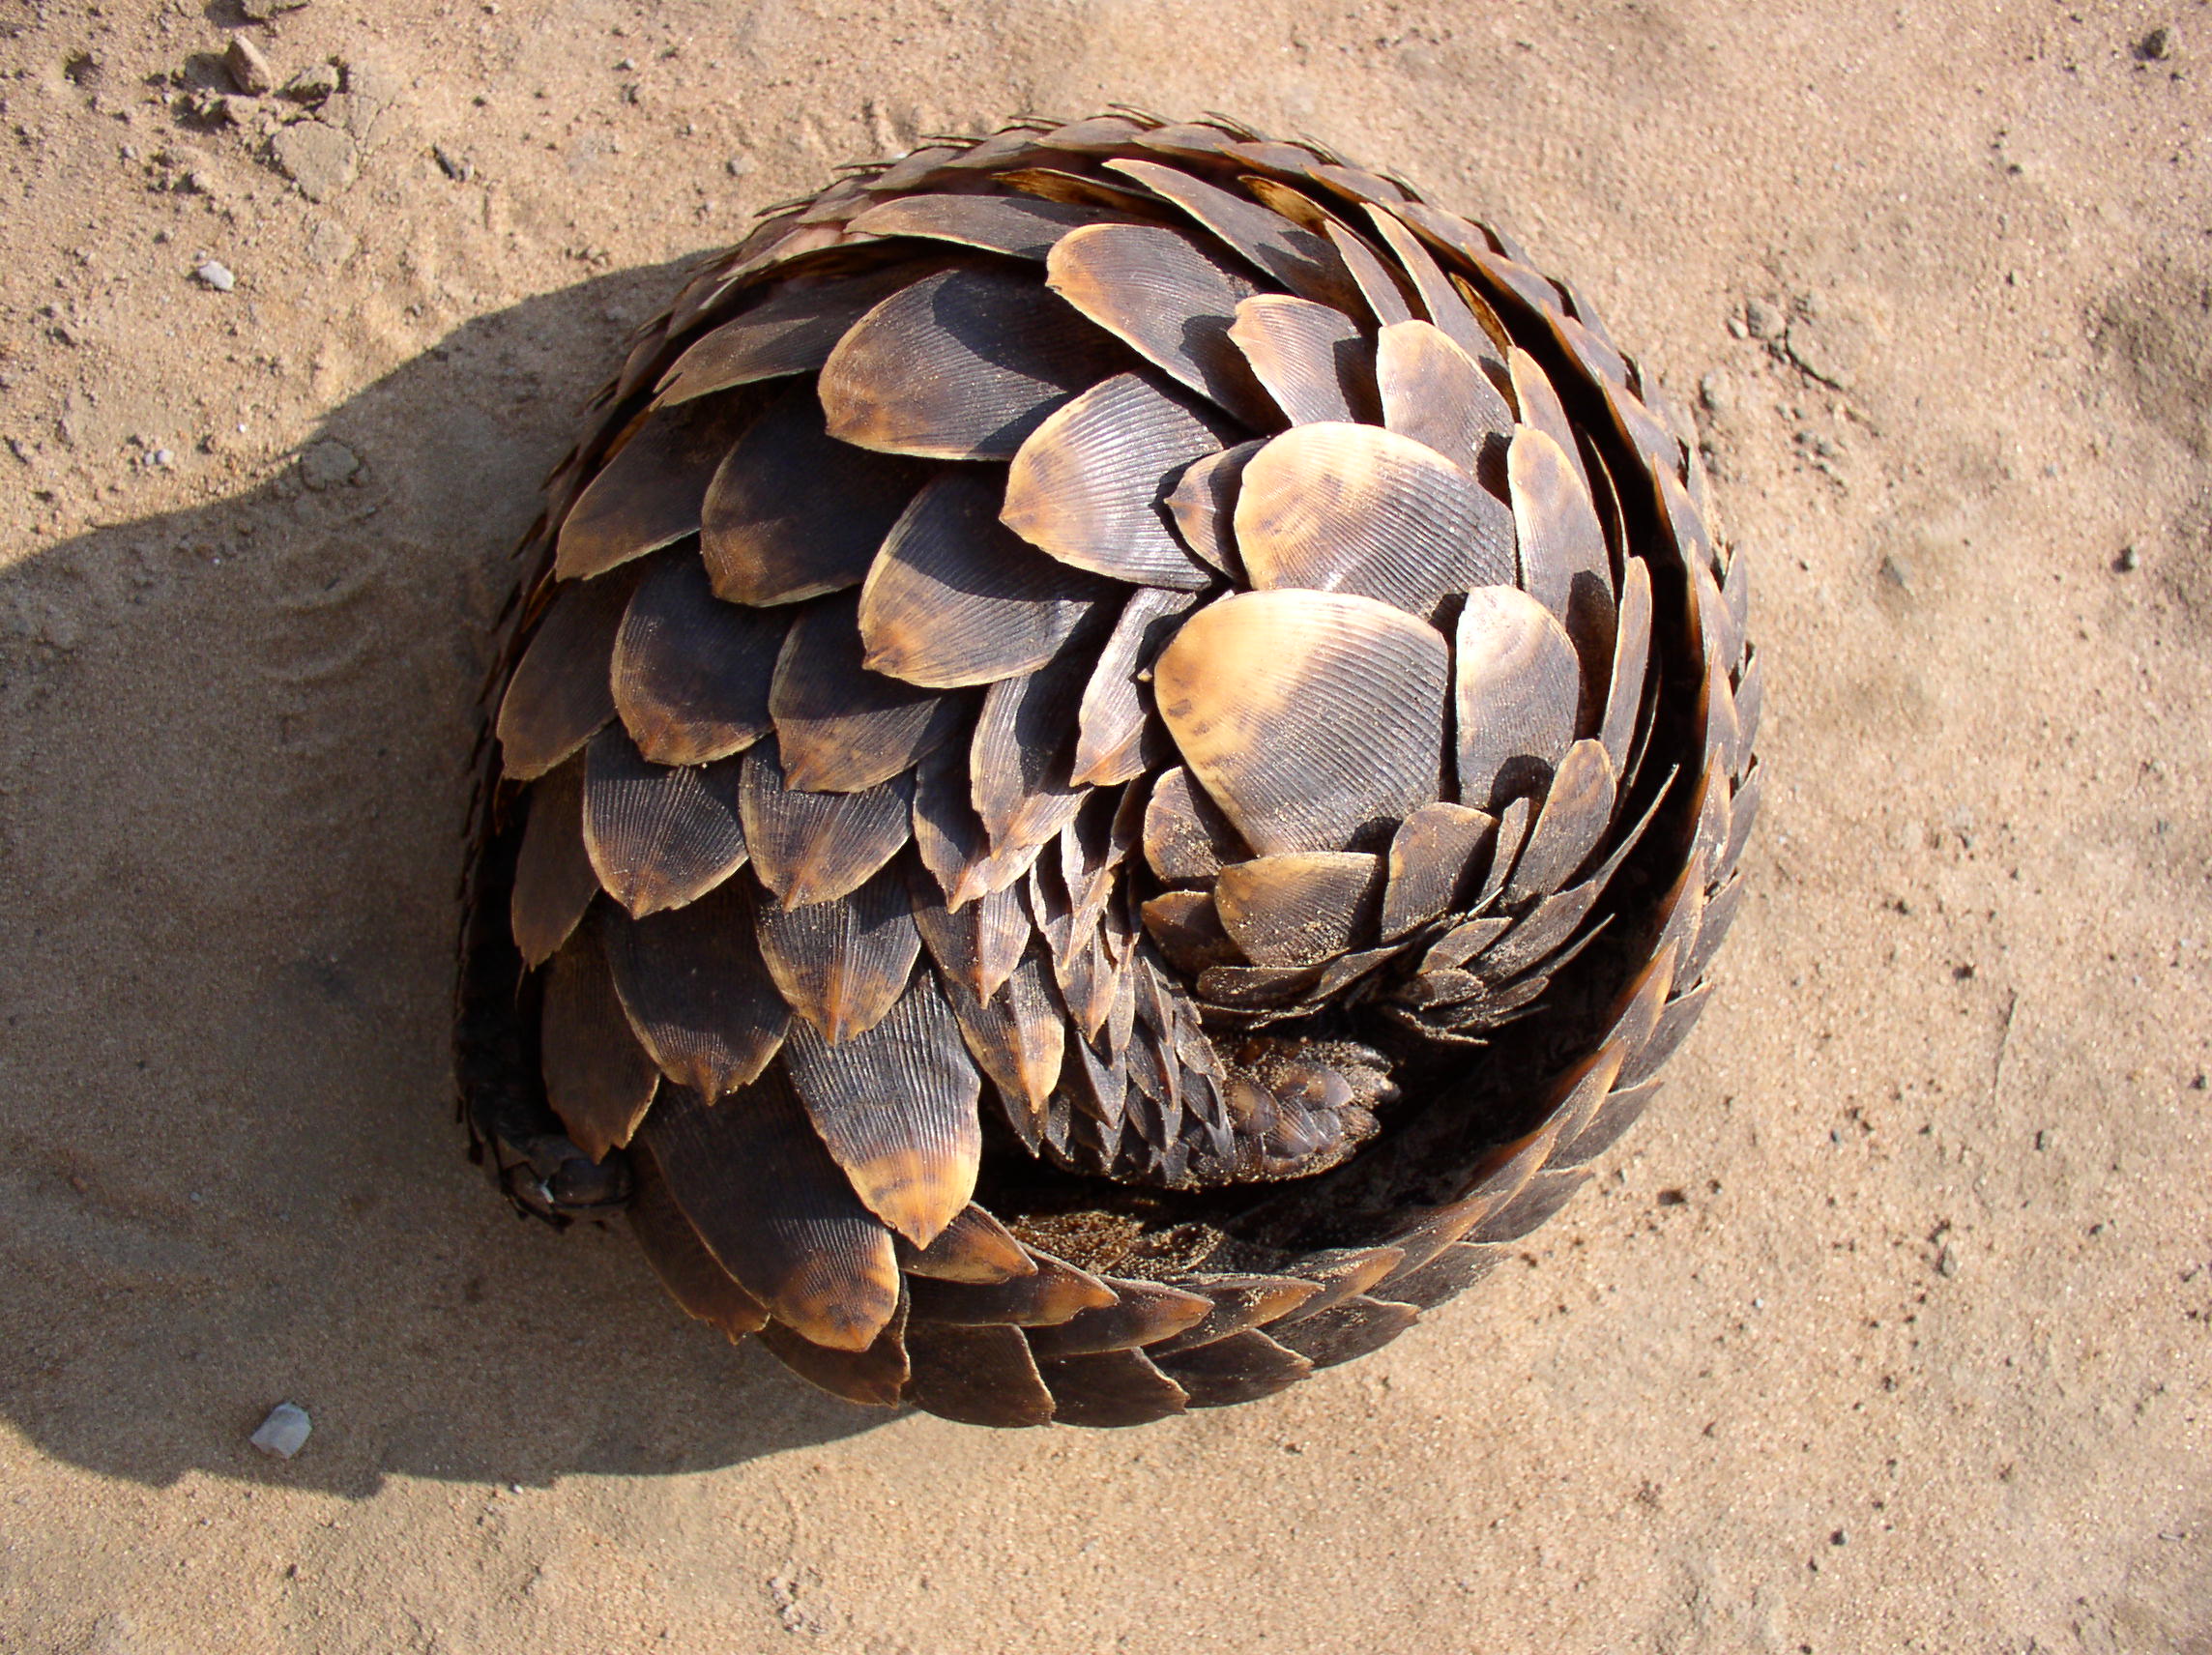 Pangolin | POACHING PROBLEMS IN INDONESIA2288 x 1712